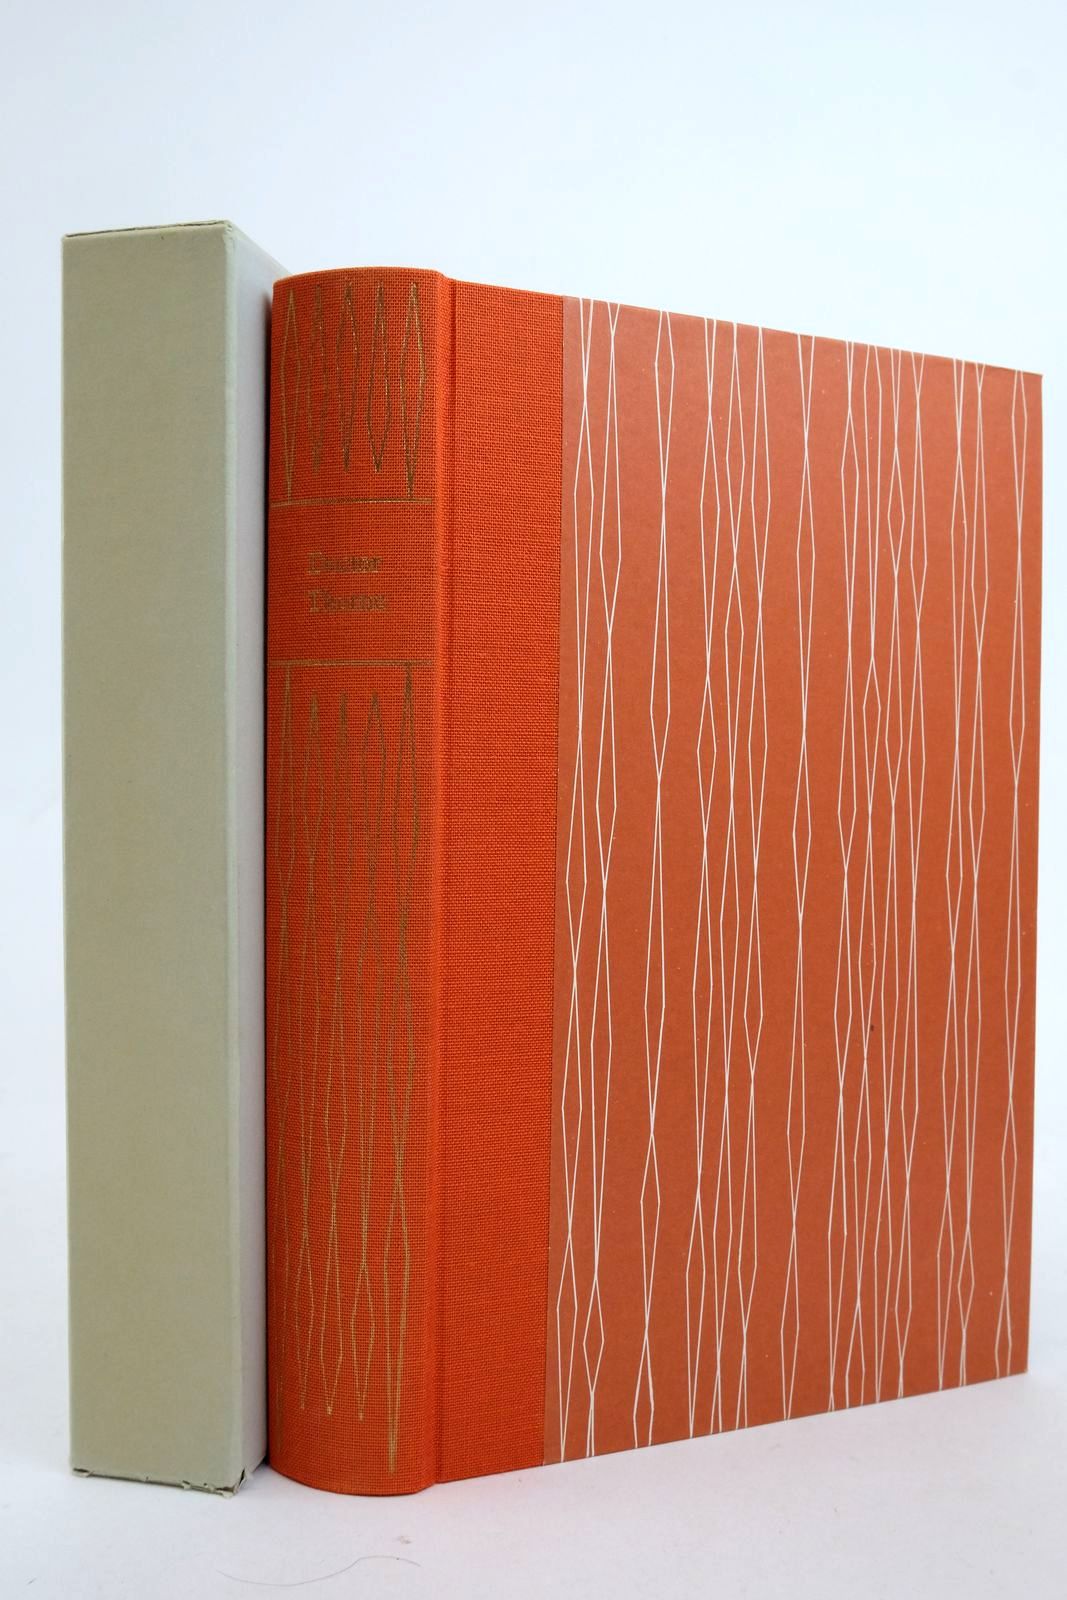 Photo of DOCTOR THORNE written by Trollope, Anthony illustrated by Reddick, Peter published by Folio Society (STOCK CODE: 2138351)  for sale by Stella & Rose's Books